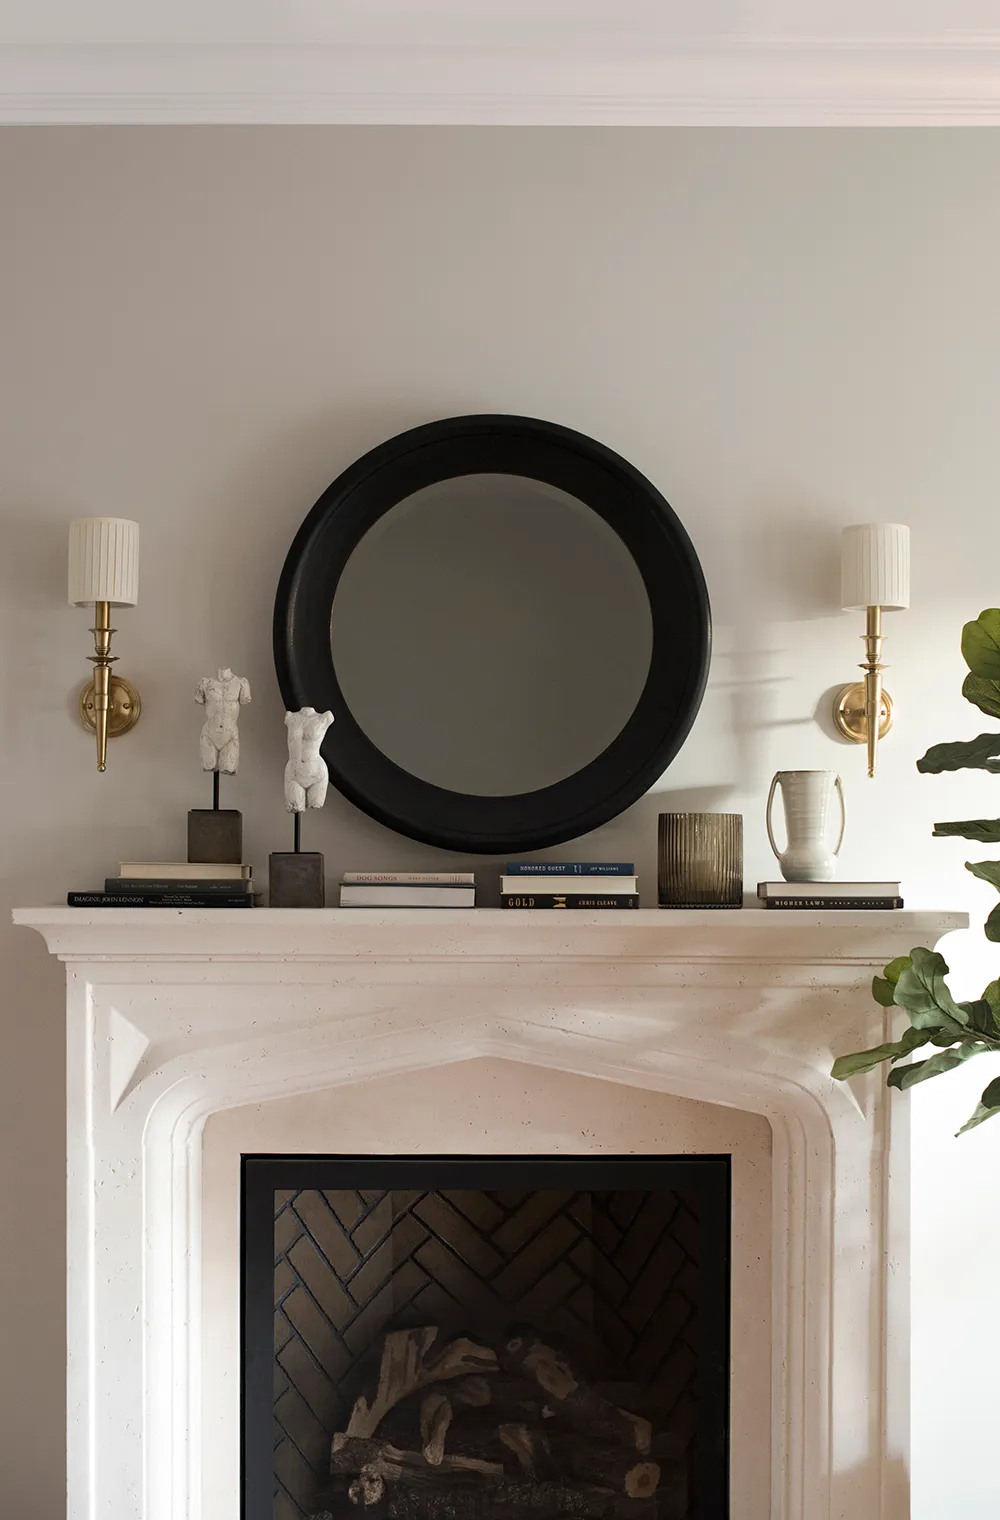 Adding a cast fireplace mantel to the space